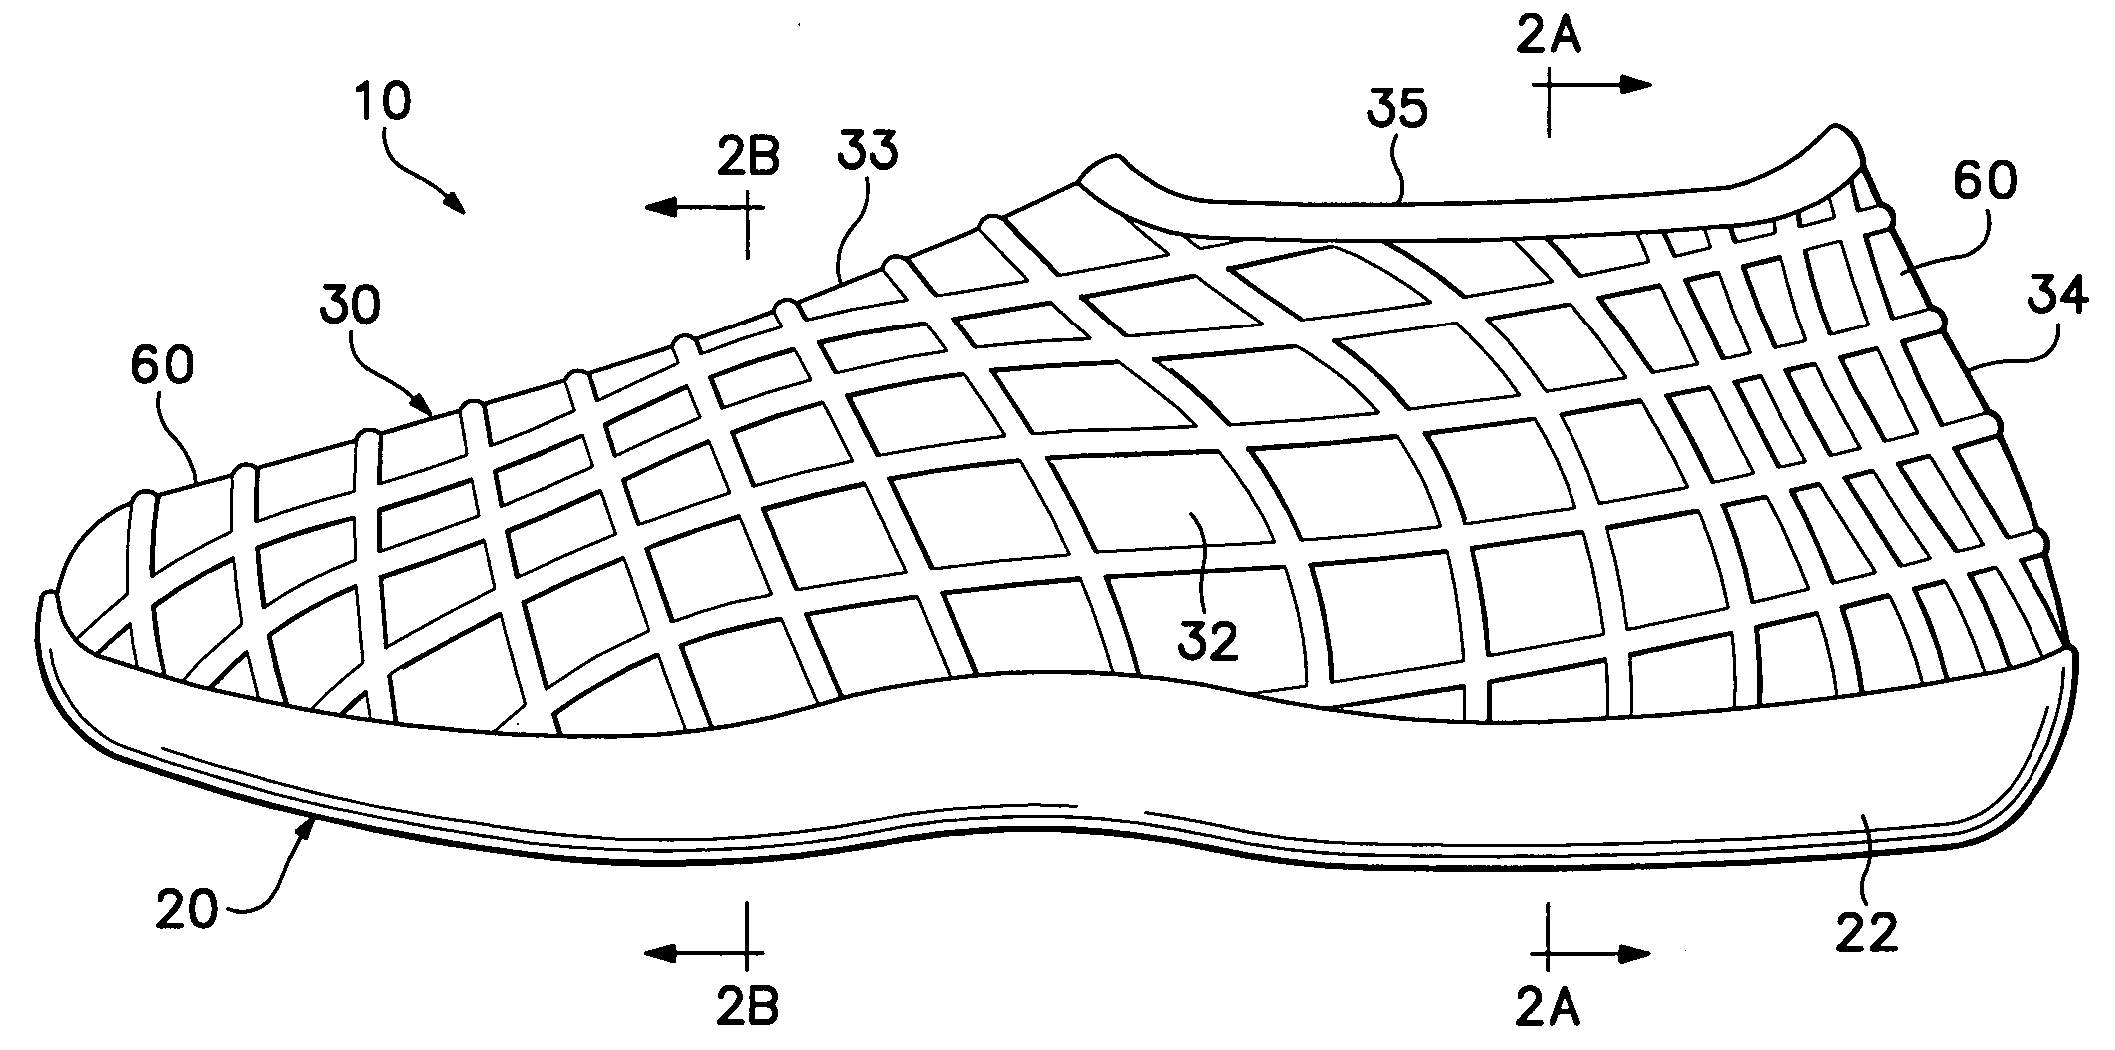 Article of footwear having an upper with a structured intermediate layer